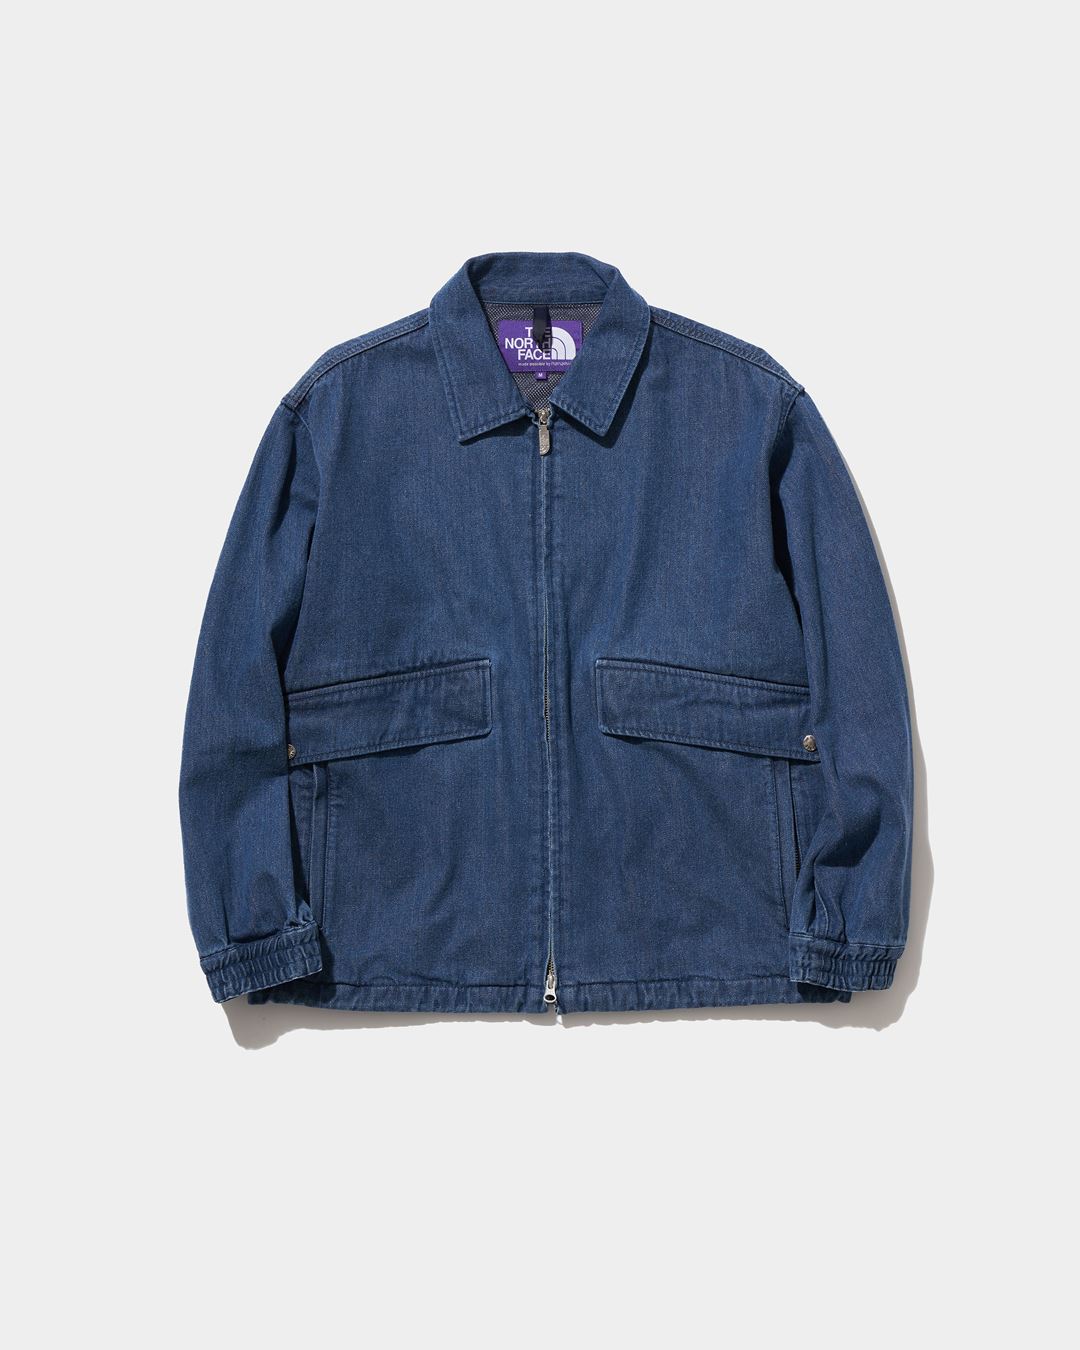 nanamica / THE NORTH FACE PURPLE LABEL / Featured Product vol.5